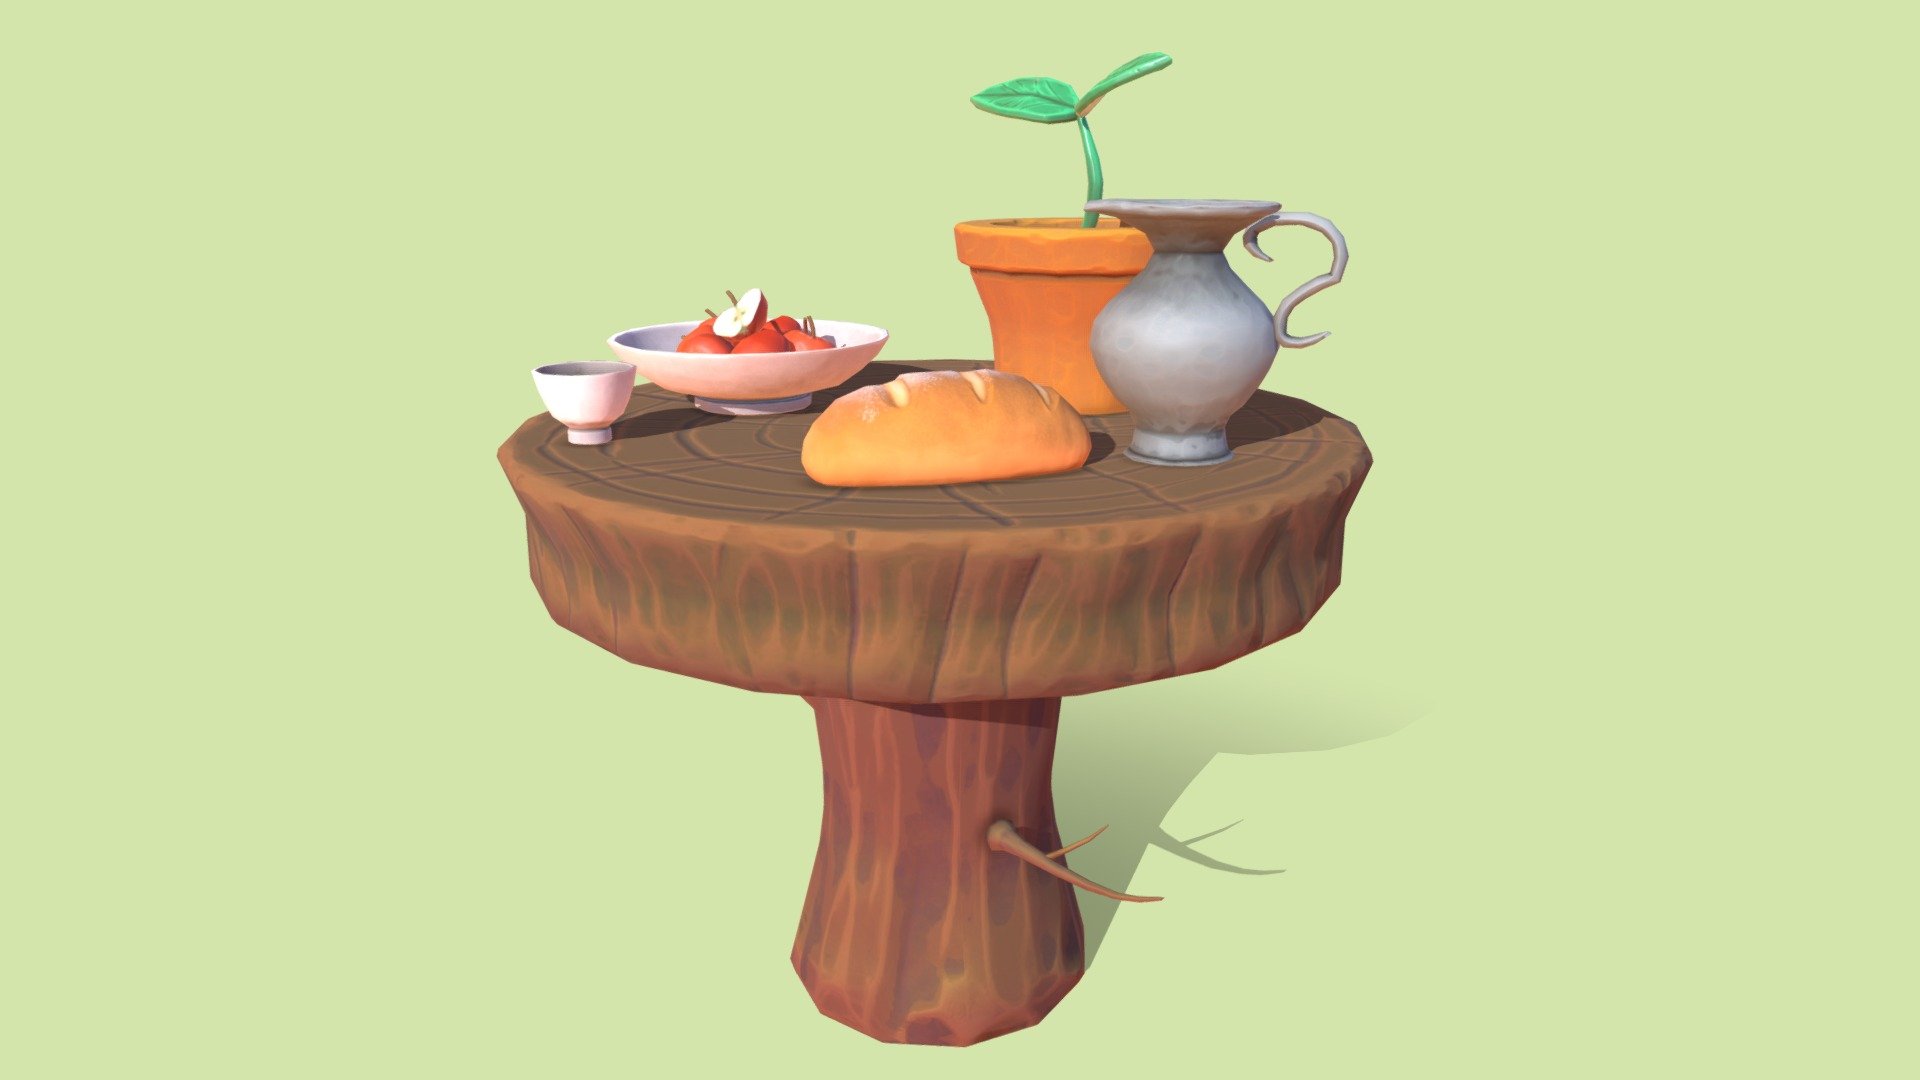 Had fun sculpting and texturing this little stylized table with a few food items and a plant. I wanted to explore the use of stylized smart materials and practice handpainting meshes as well. The bread, apples, and soil are handpainted.

I’m also very inspired nowadays by the vibrant world of Spyro Reignited Trilogy and I’m thinking making more such stylized assets :)

As for the software, I used Maya, Zbrush and Substance Painter.

Any feedback is welcome! - Stylized Fantasy Table - 3D model by Lavi (@lavi3d) 3d model